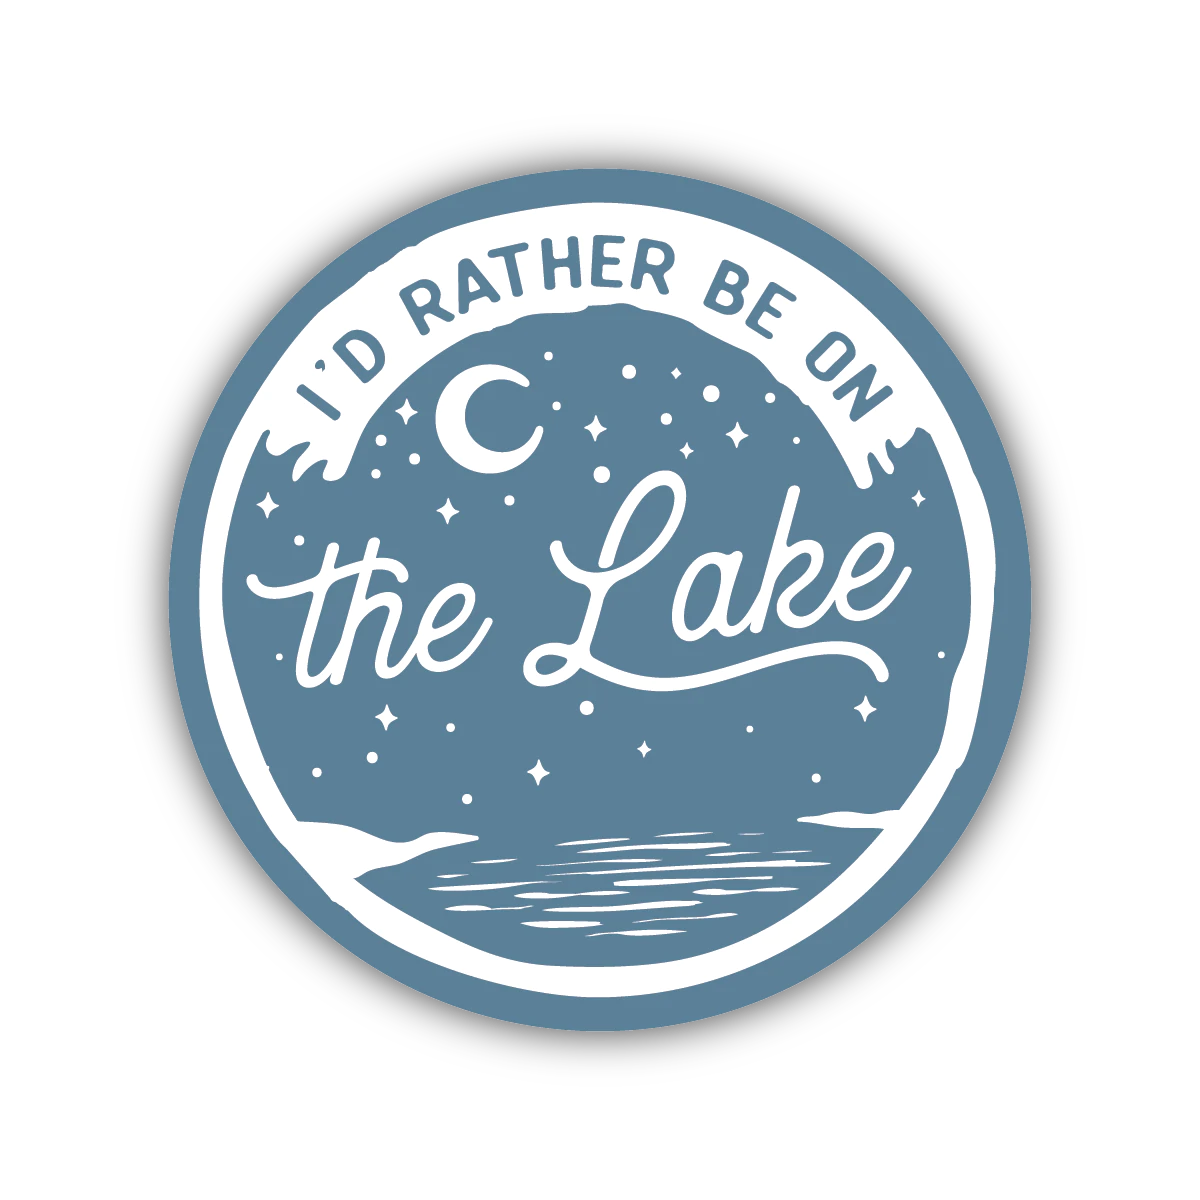 I'd Rather be on the Lake Sticker